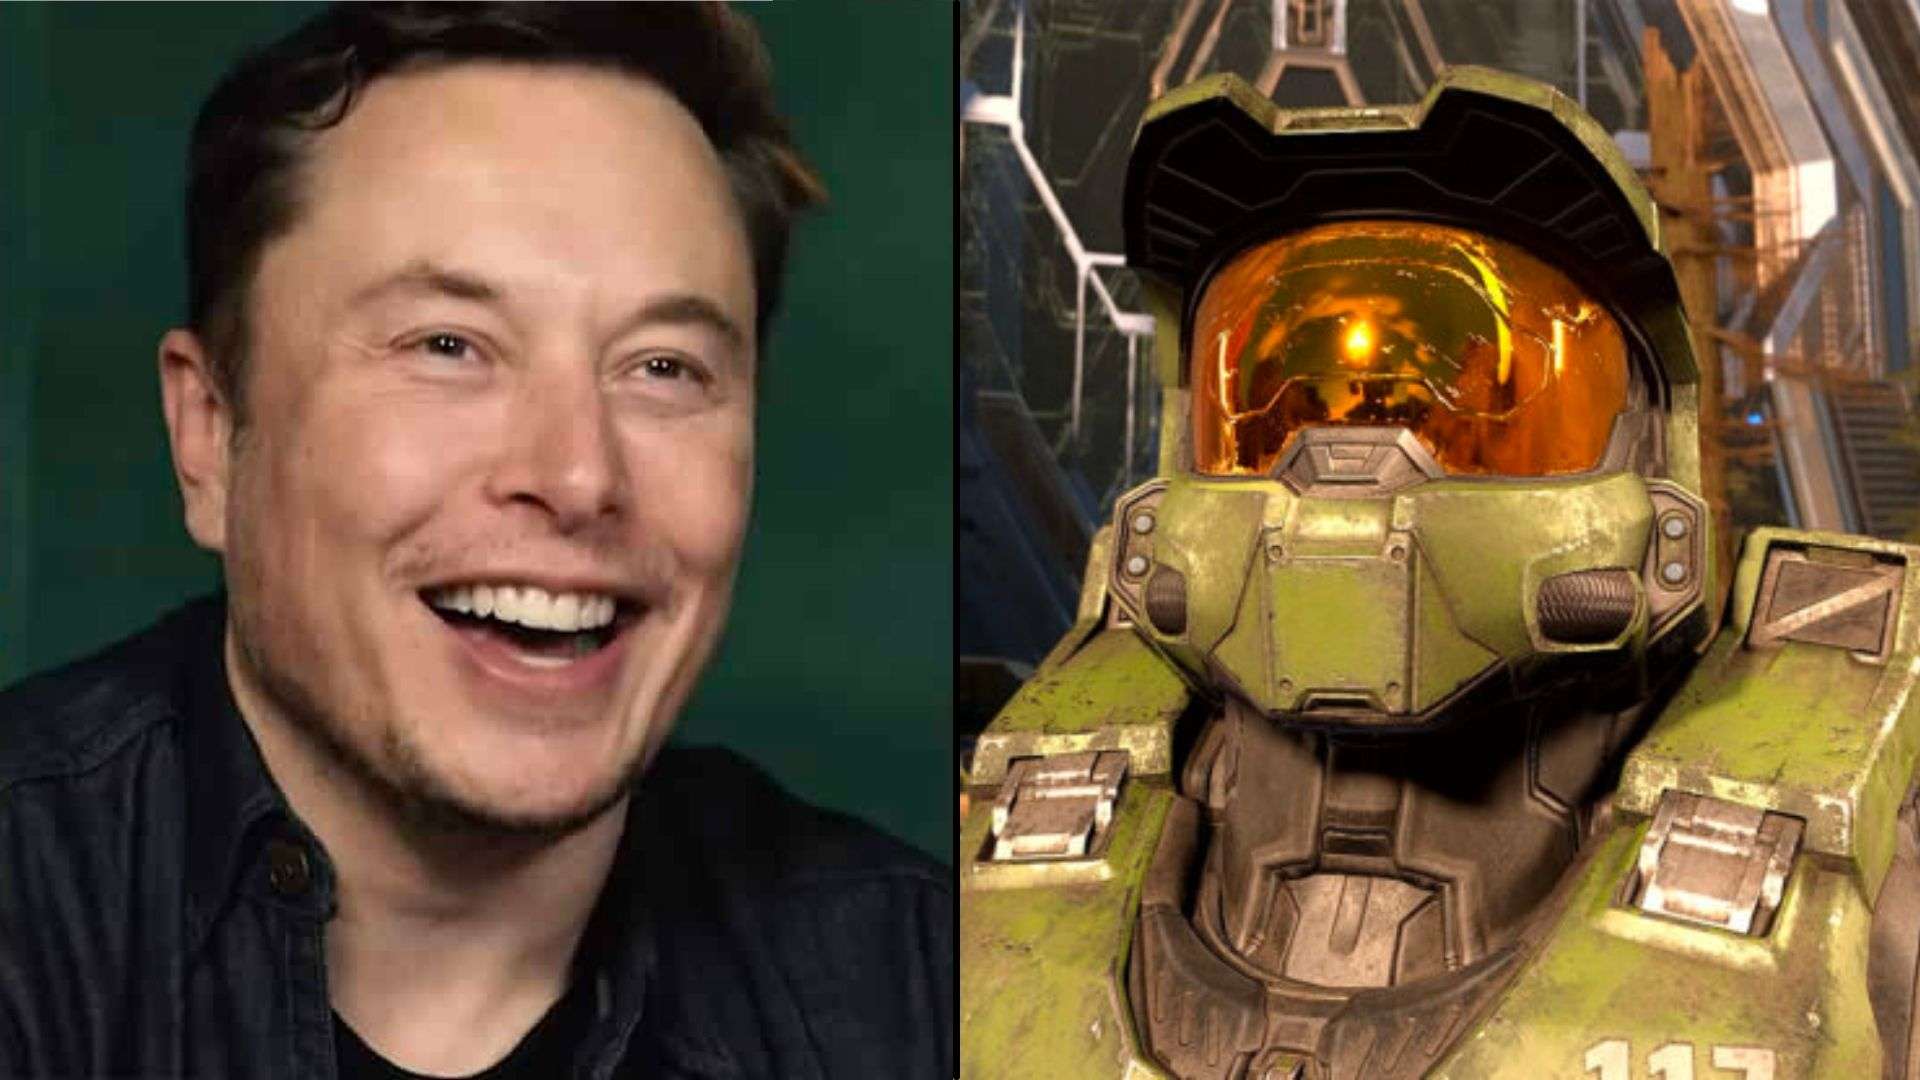 Elon Musk side by side with Master Chief from Halo Infinite